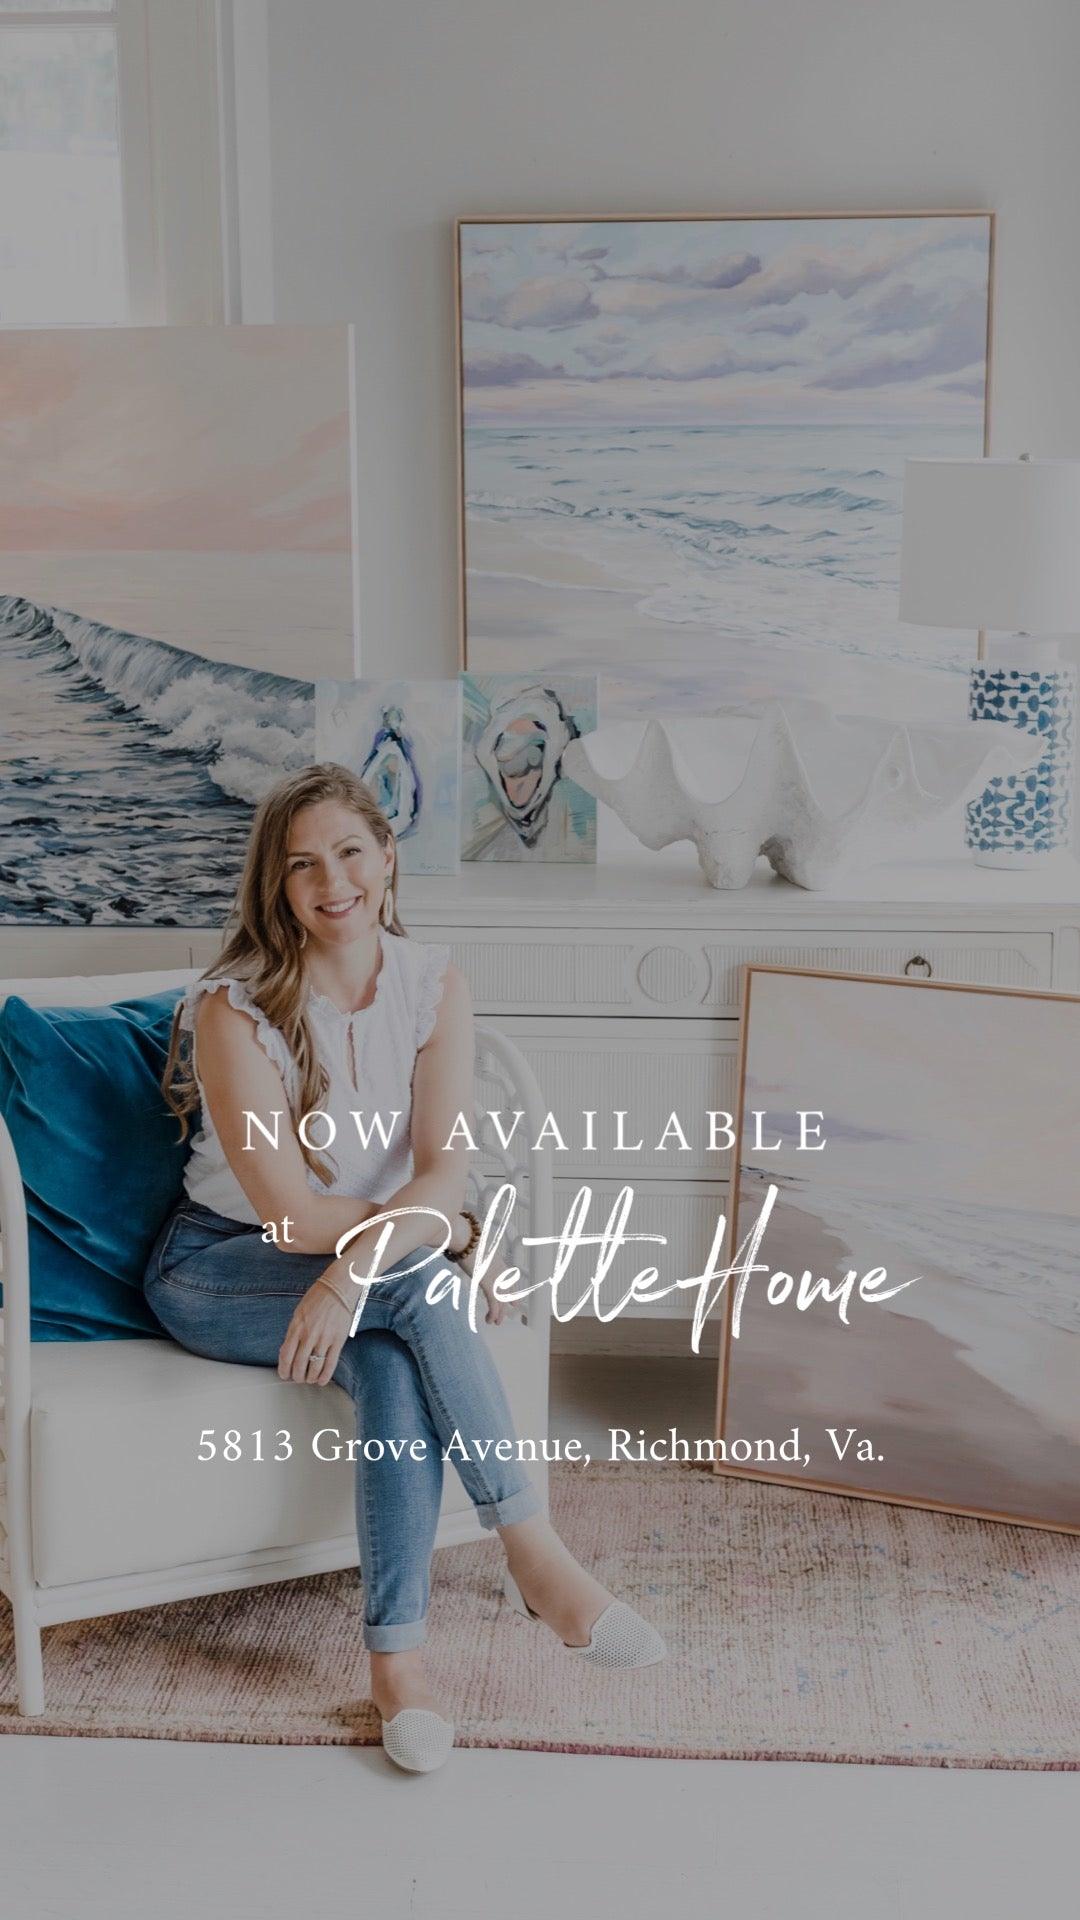 New Work Exclusively at Palette Home in Richmond, Va - Stephie Jones Art